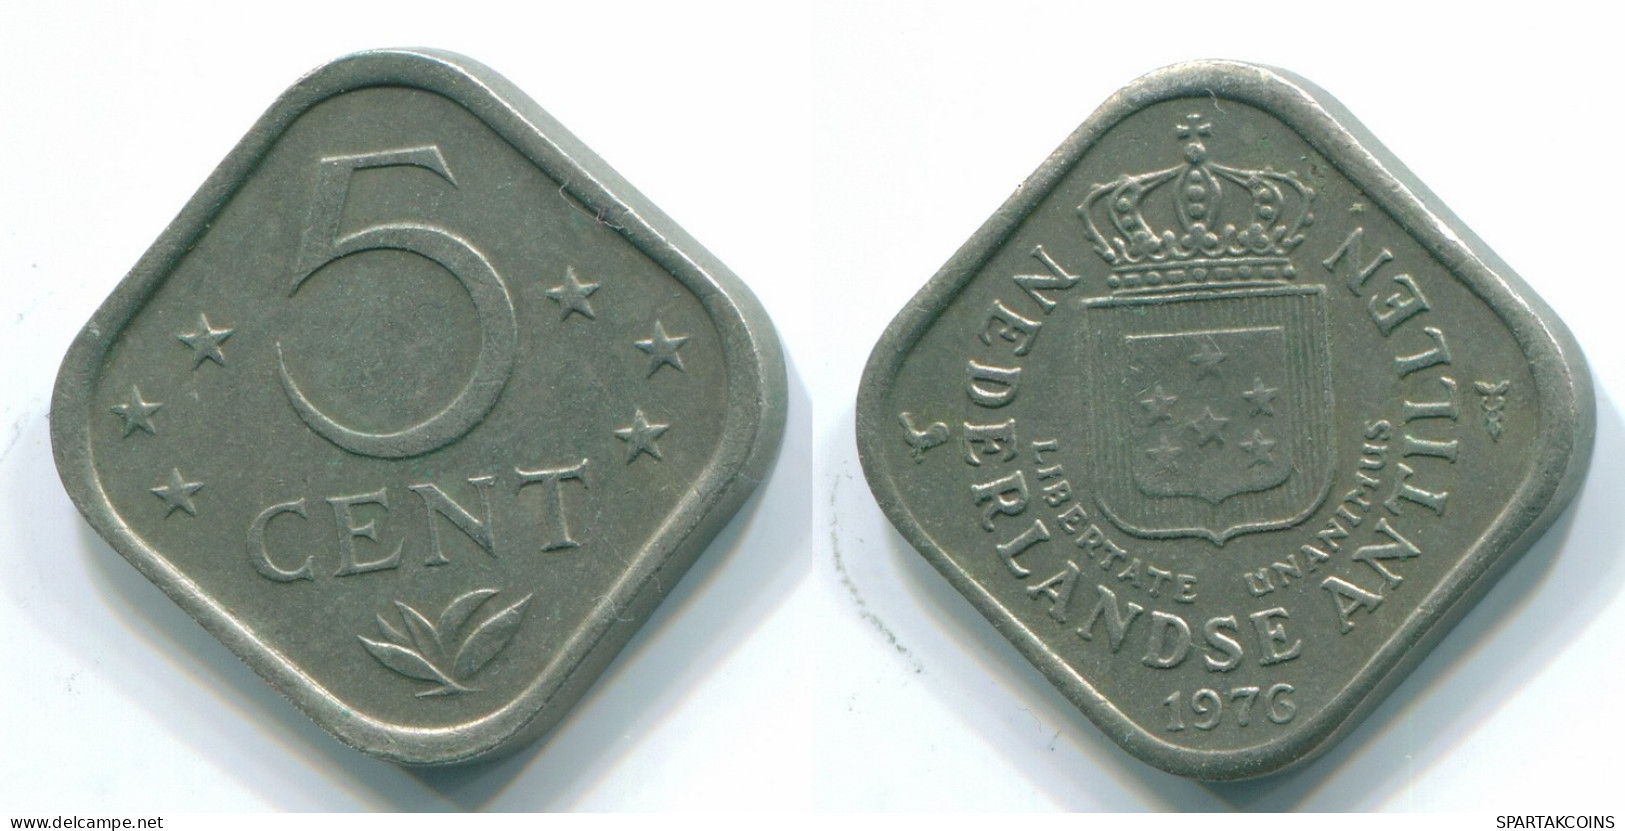 5 CENTS 1976 NETHERLANDS ANTILLES Nickel Colonial Coin #S12269.U.A - Netherlands Antilles